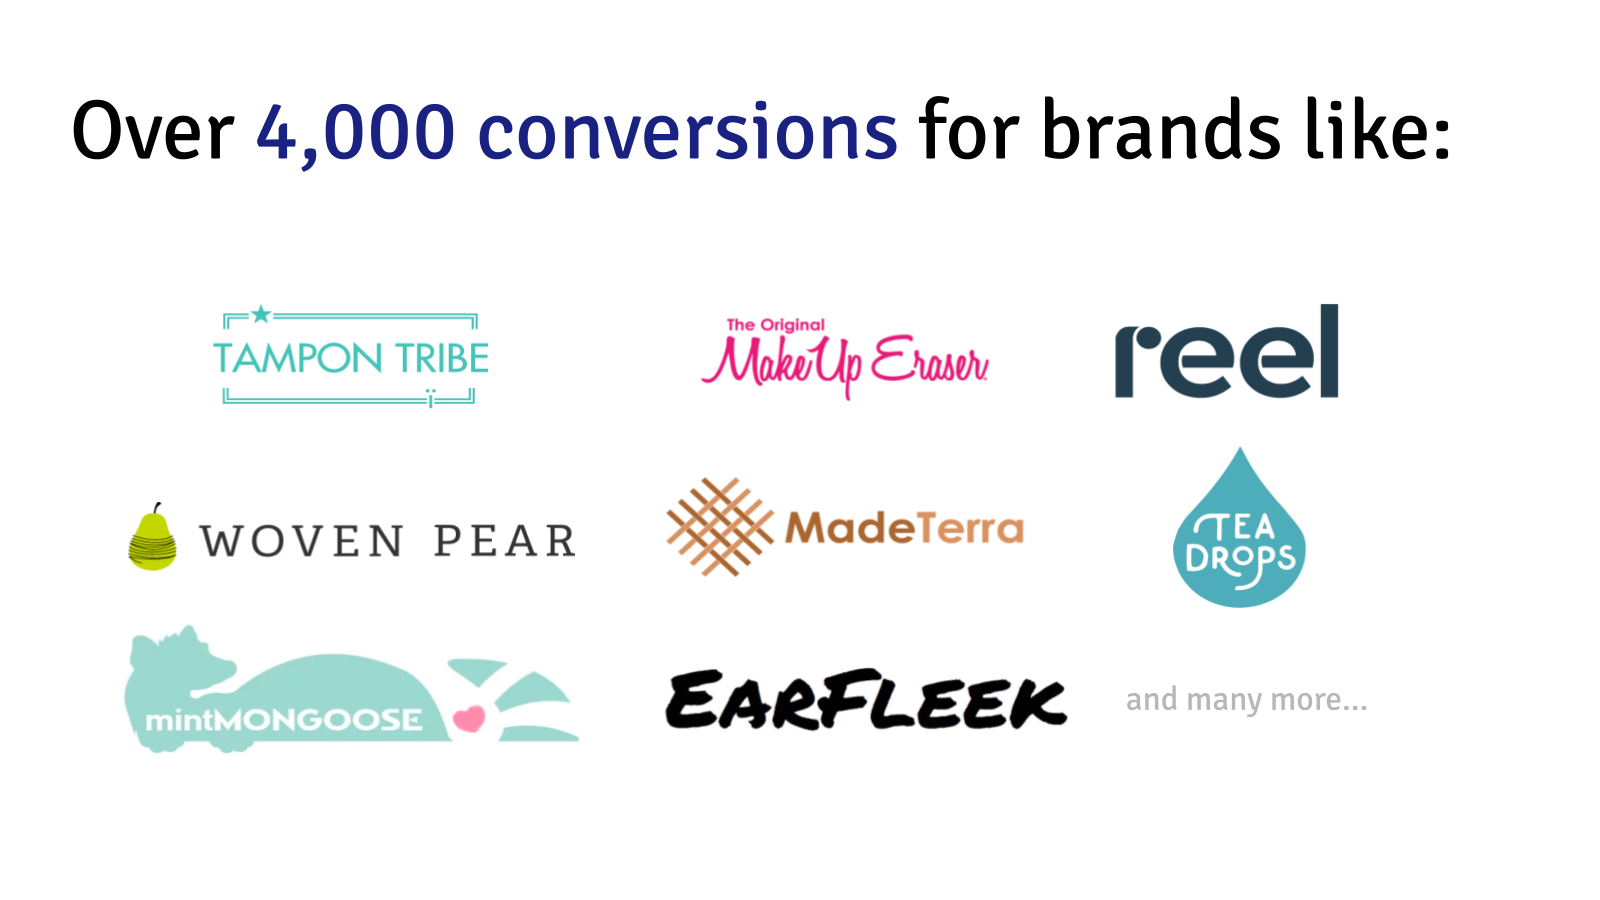 We've generated over 4,000 conversions